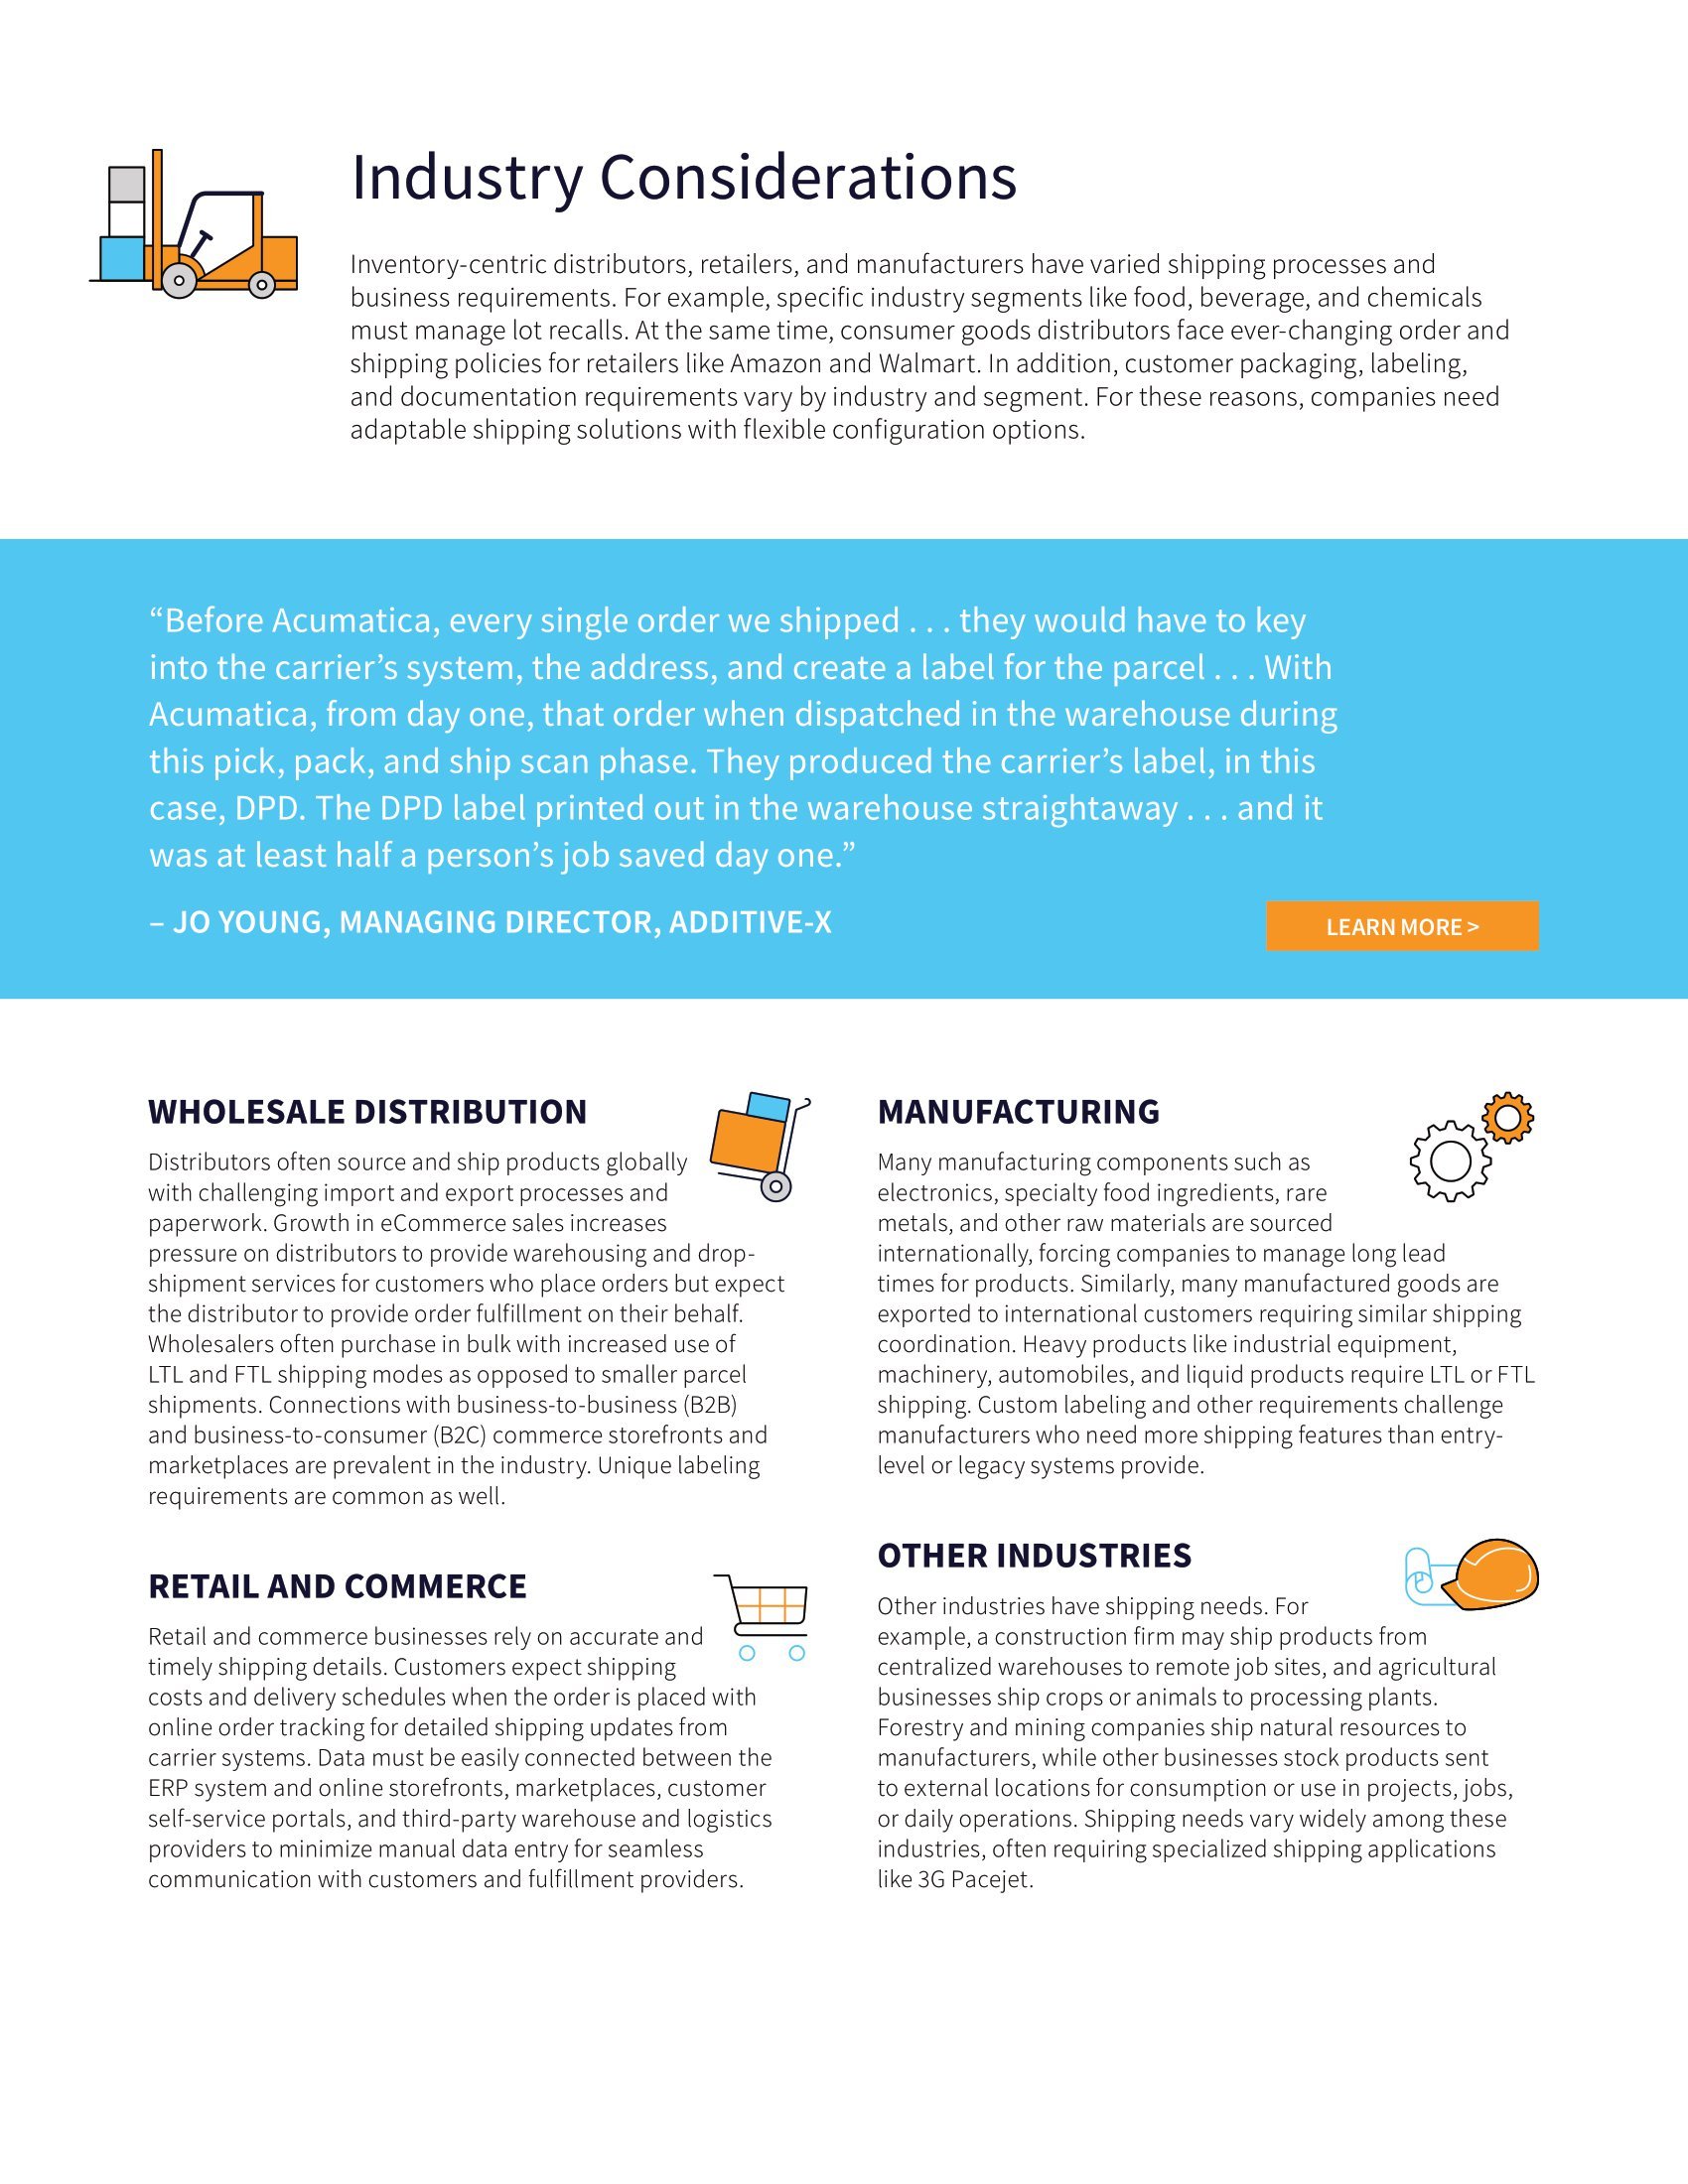 Why Modern Cloud ERP Applications and Connected Shipping is a Must for Today’s Distributors, Retailers, and Manufacturers, page 2